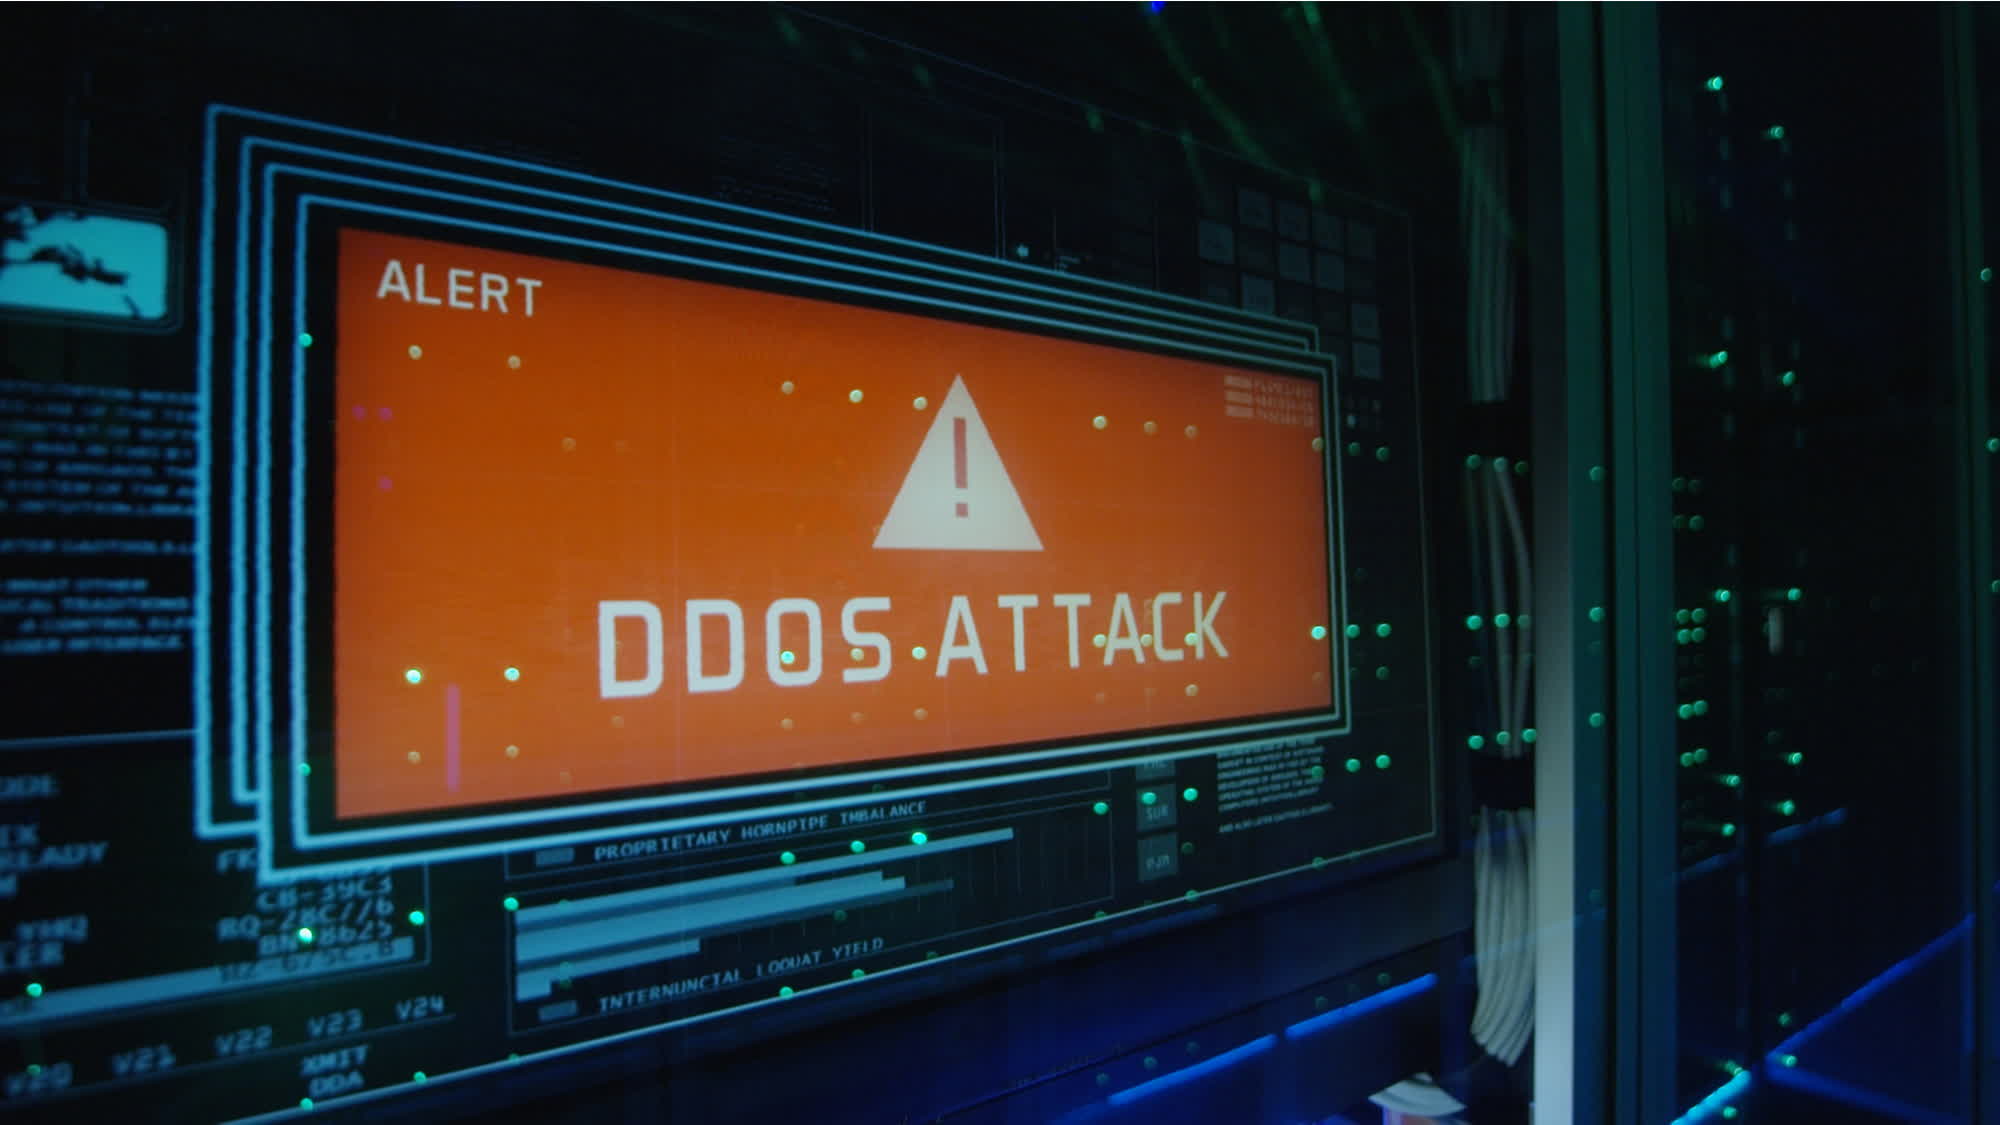 Reflection DDoS attacks are on the rise again